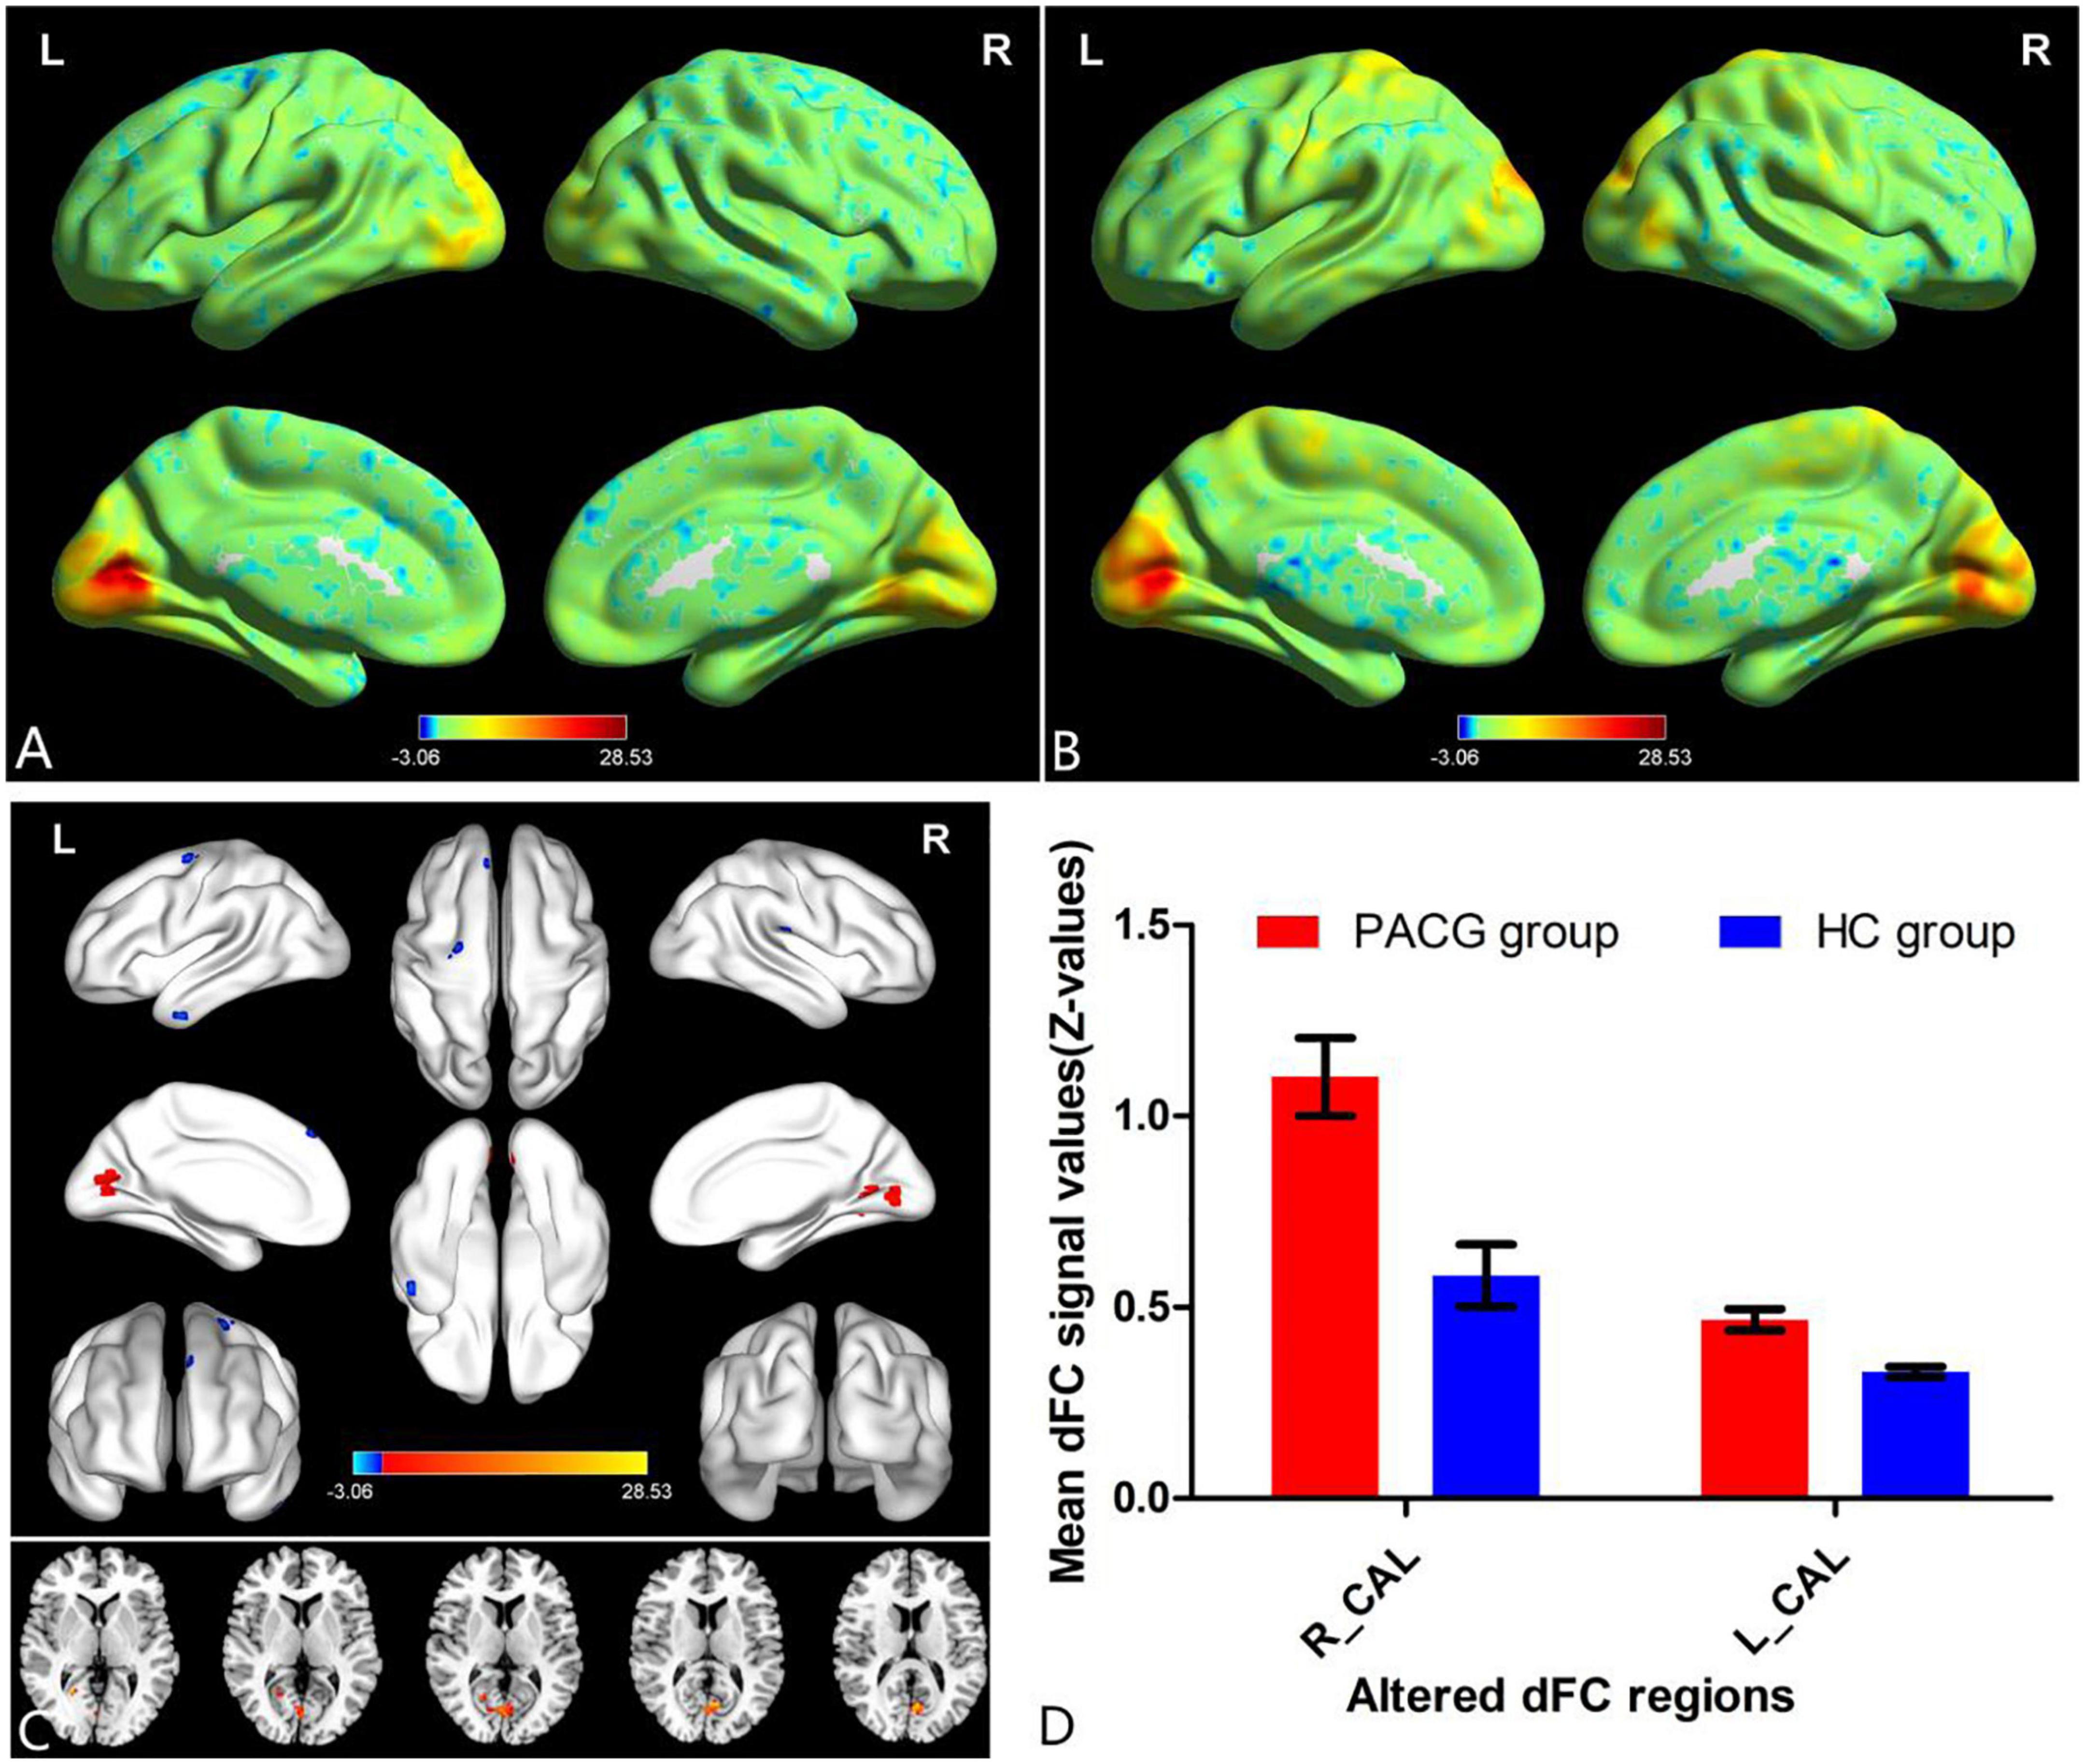 Altered dynamic functional connectivity in the primary visual cortex in patients with primary angle-closure glaucoma